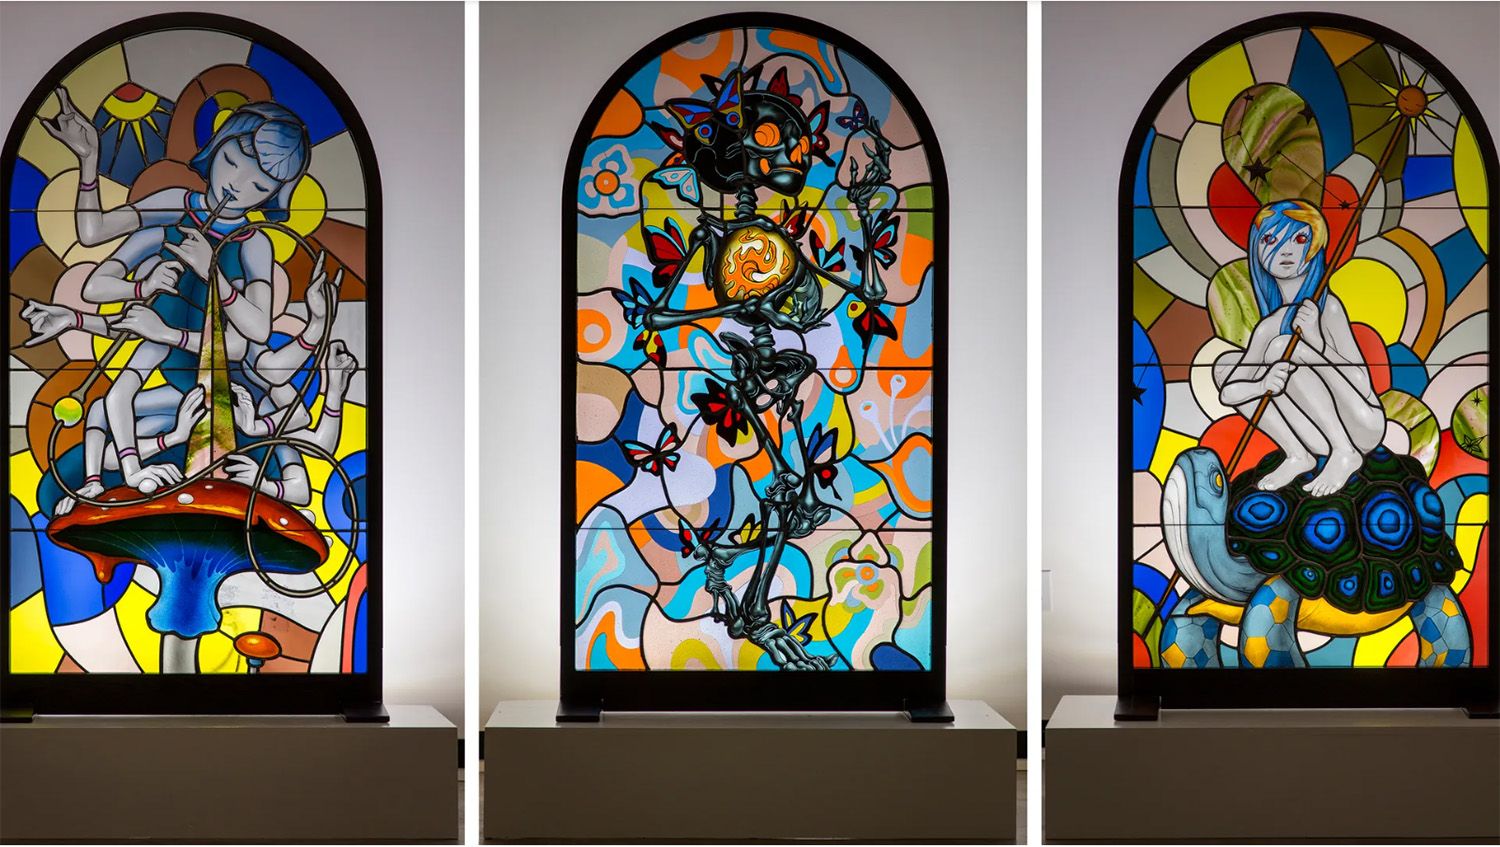 Architectural Digest: Inside the Renaissance and Future of Stained Glass